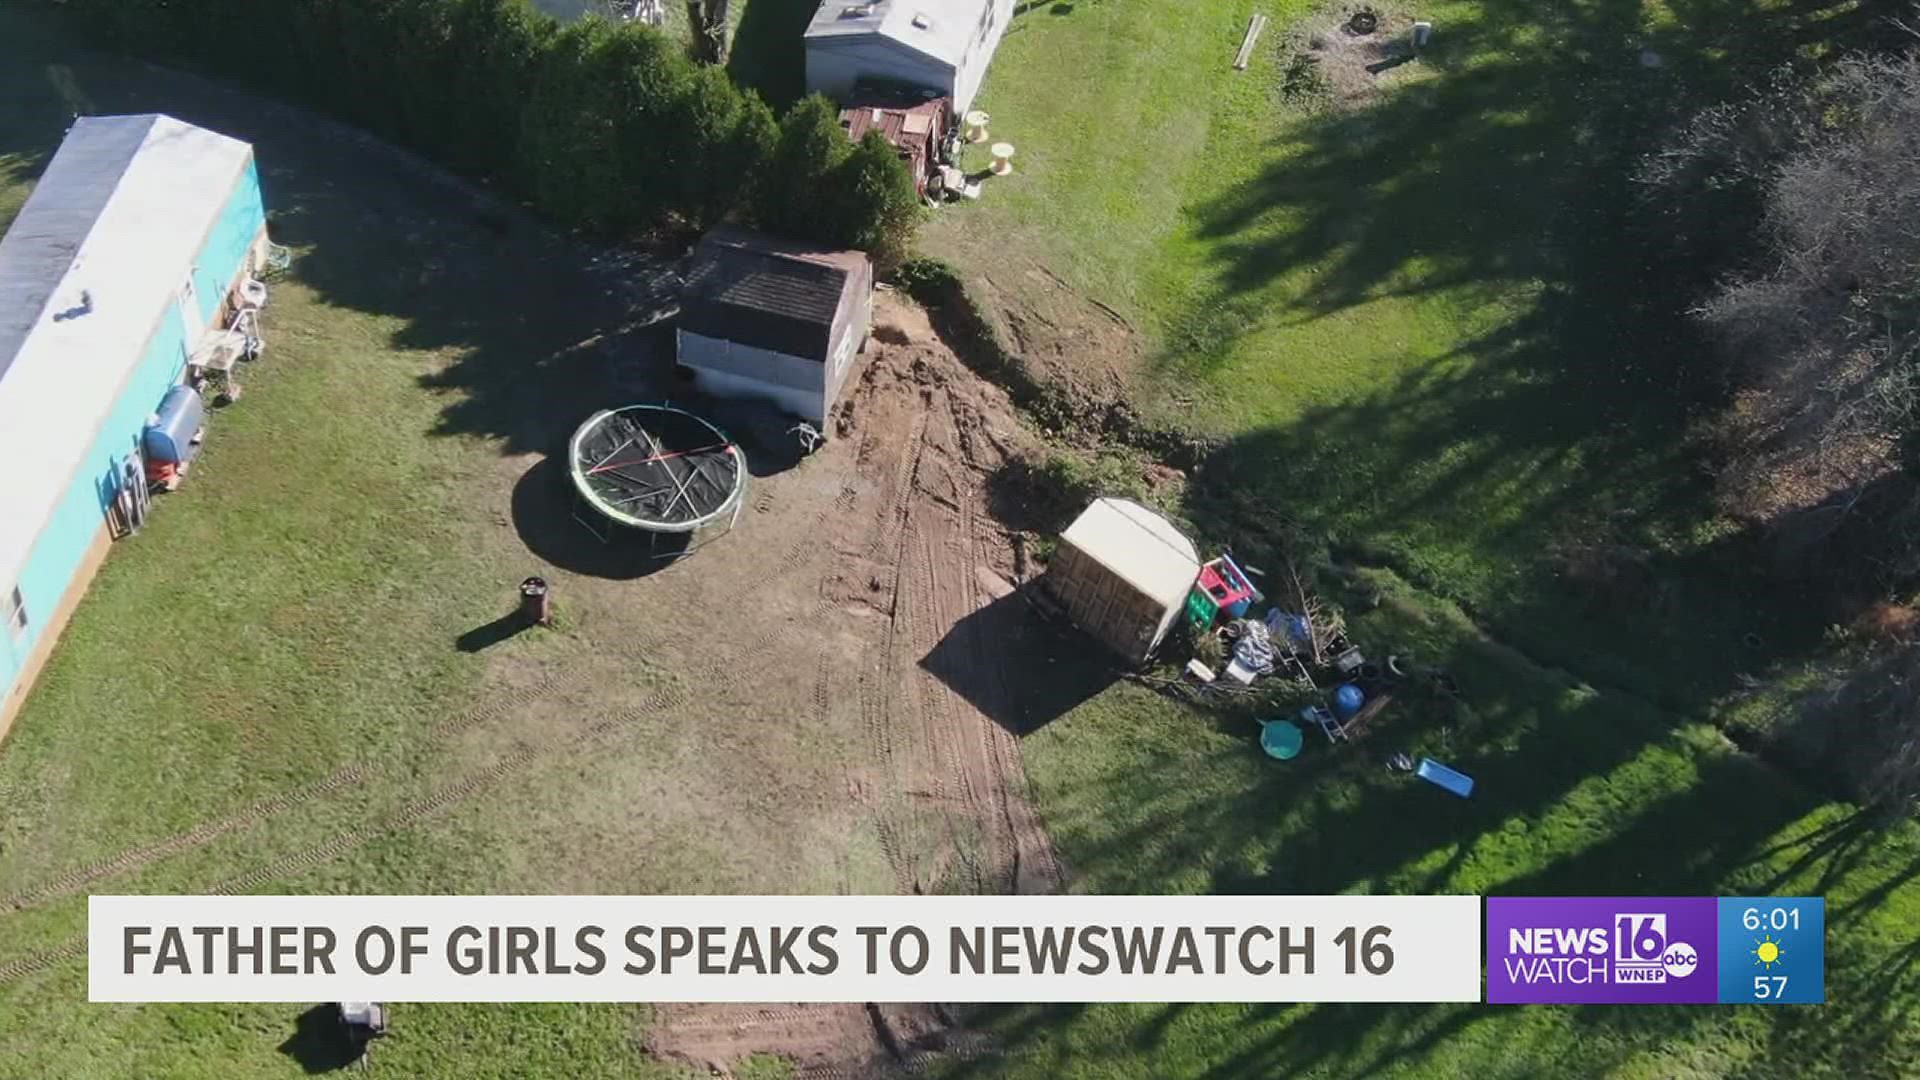 A father opens up to Newswatch 16 about learning that the daughters he has not seen for years are likely dead.